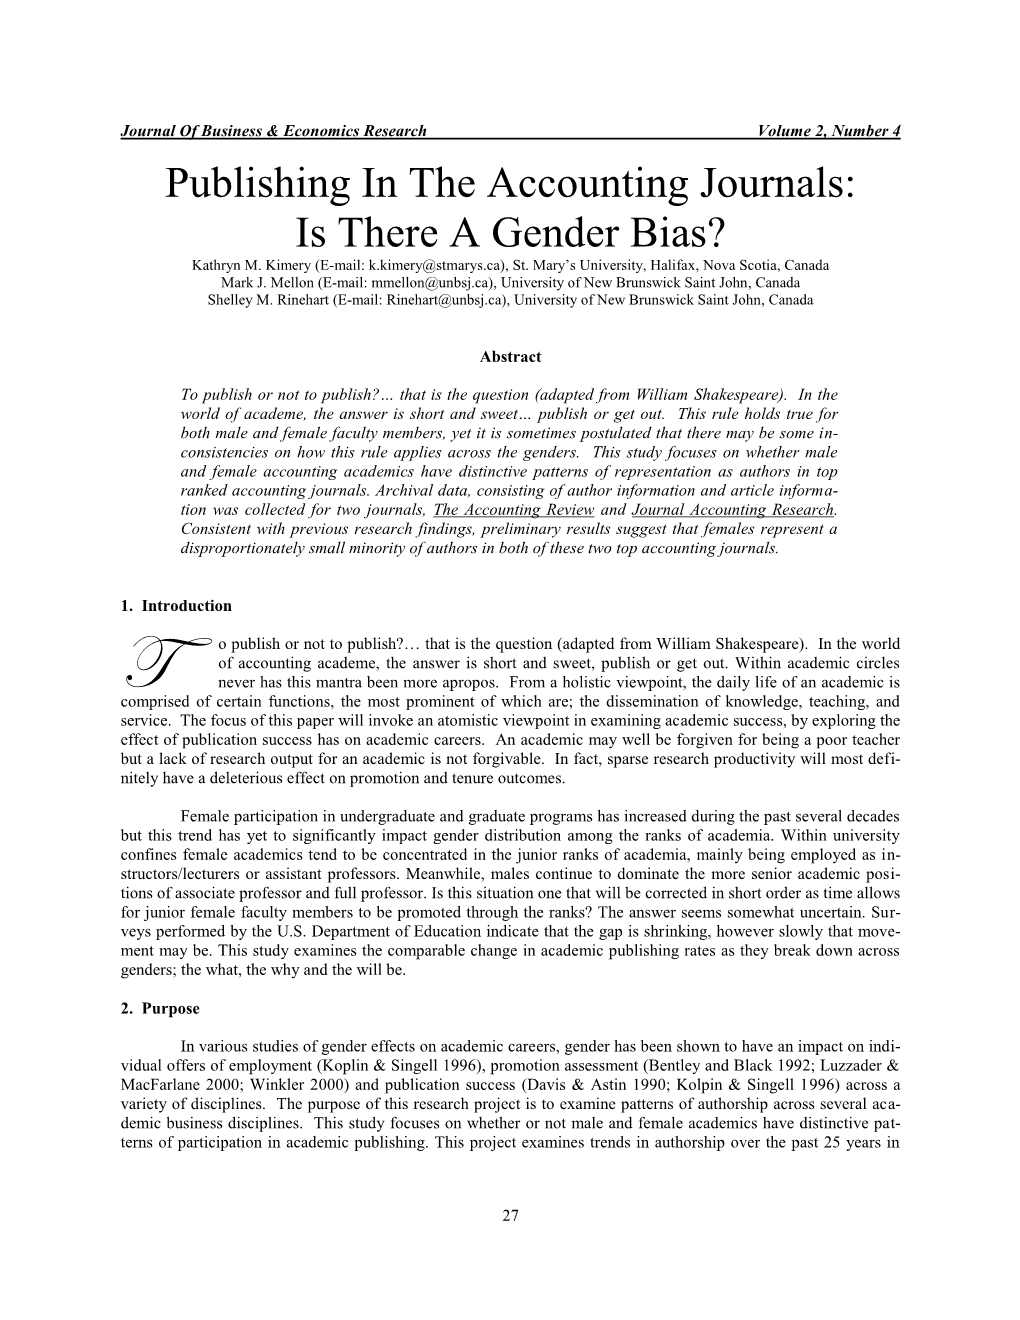 Publishing in the Accounting Journals: Is There a Gender Bias? Kathryn M